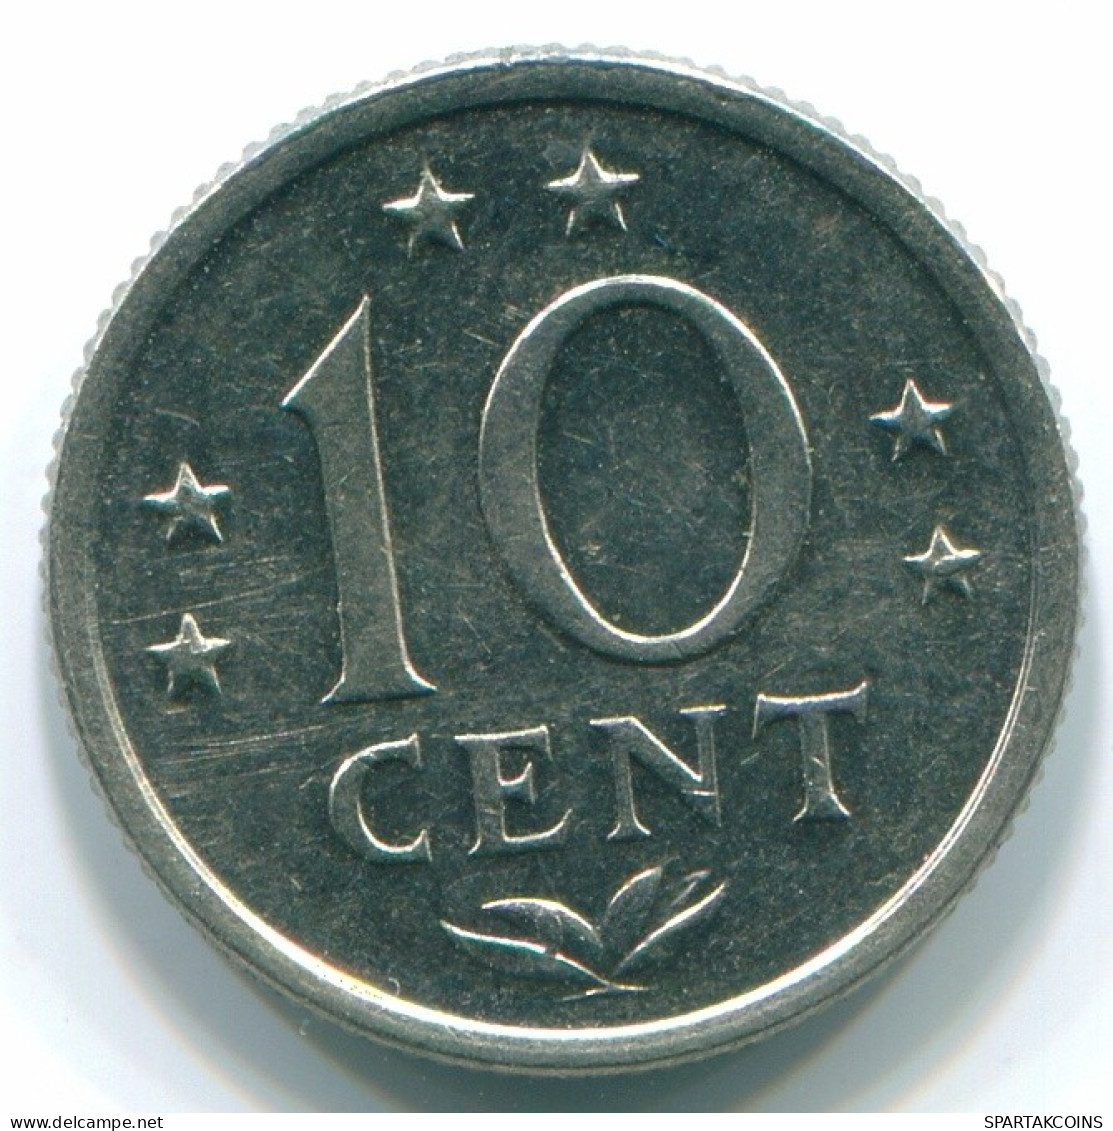 10 CENTS 1971 NETHERLANDS ANTILLES Nickel Colonial Coin #S13411.U.A - Netherlands Antilles